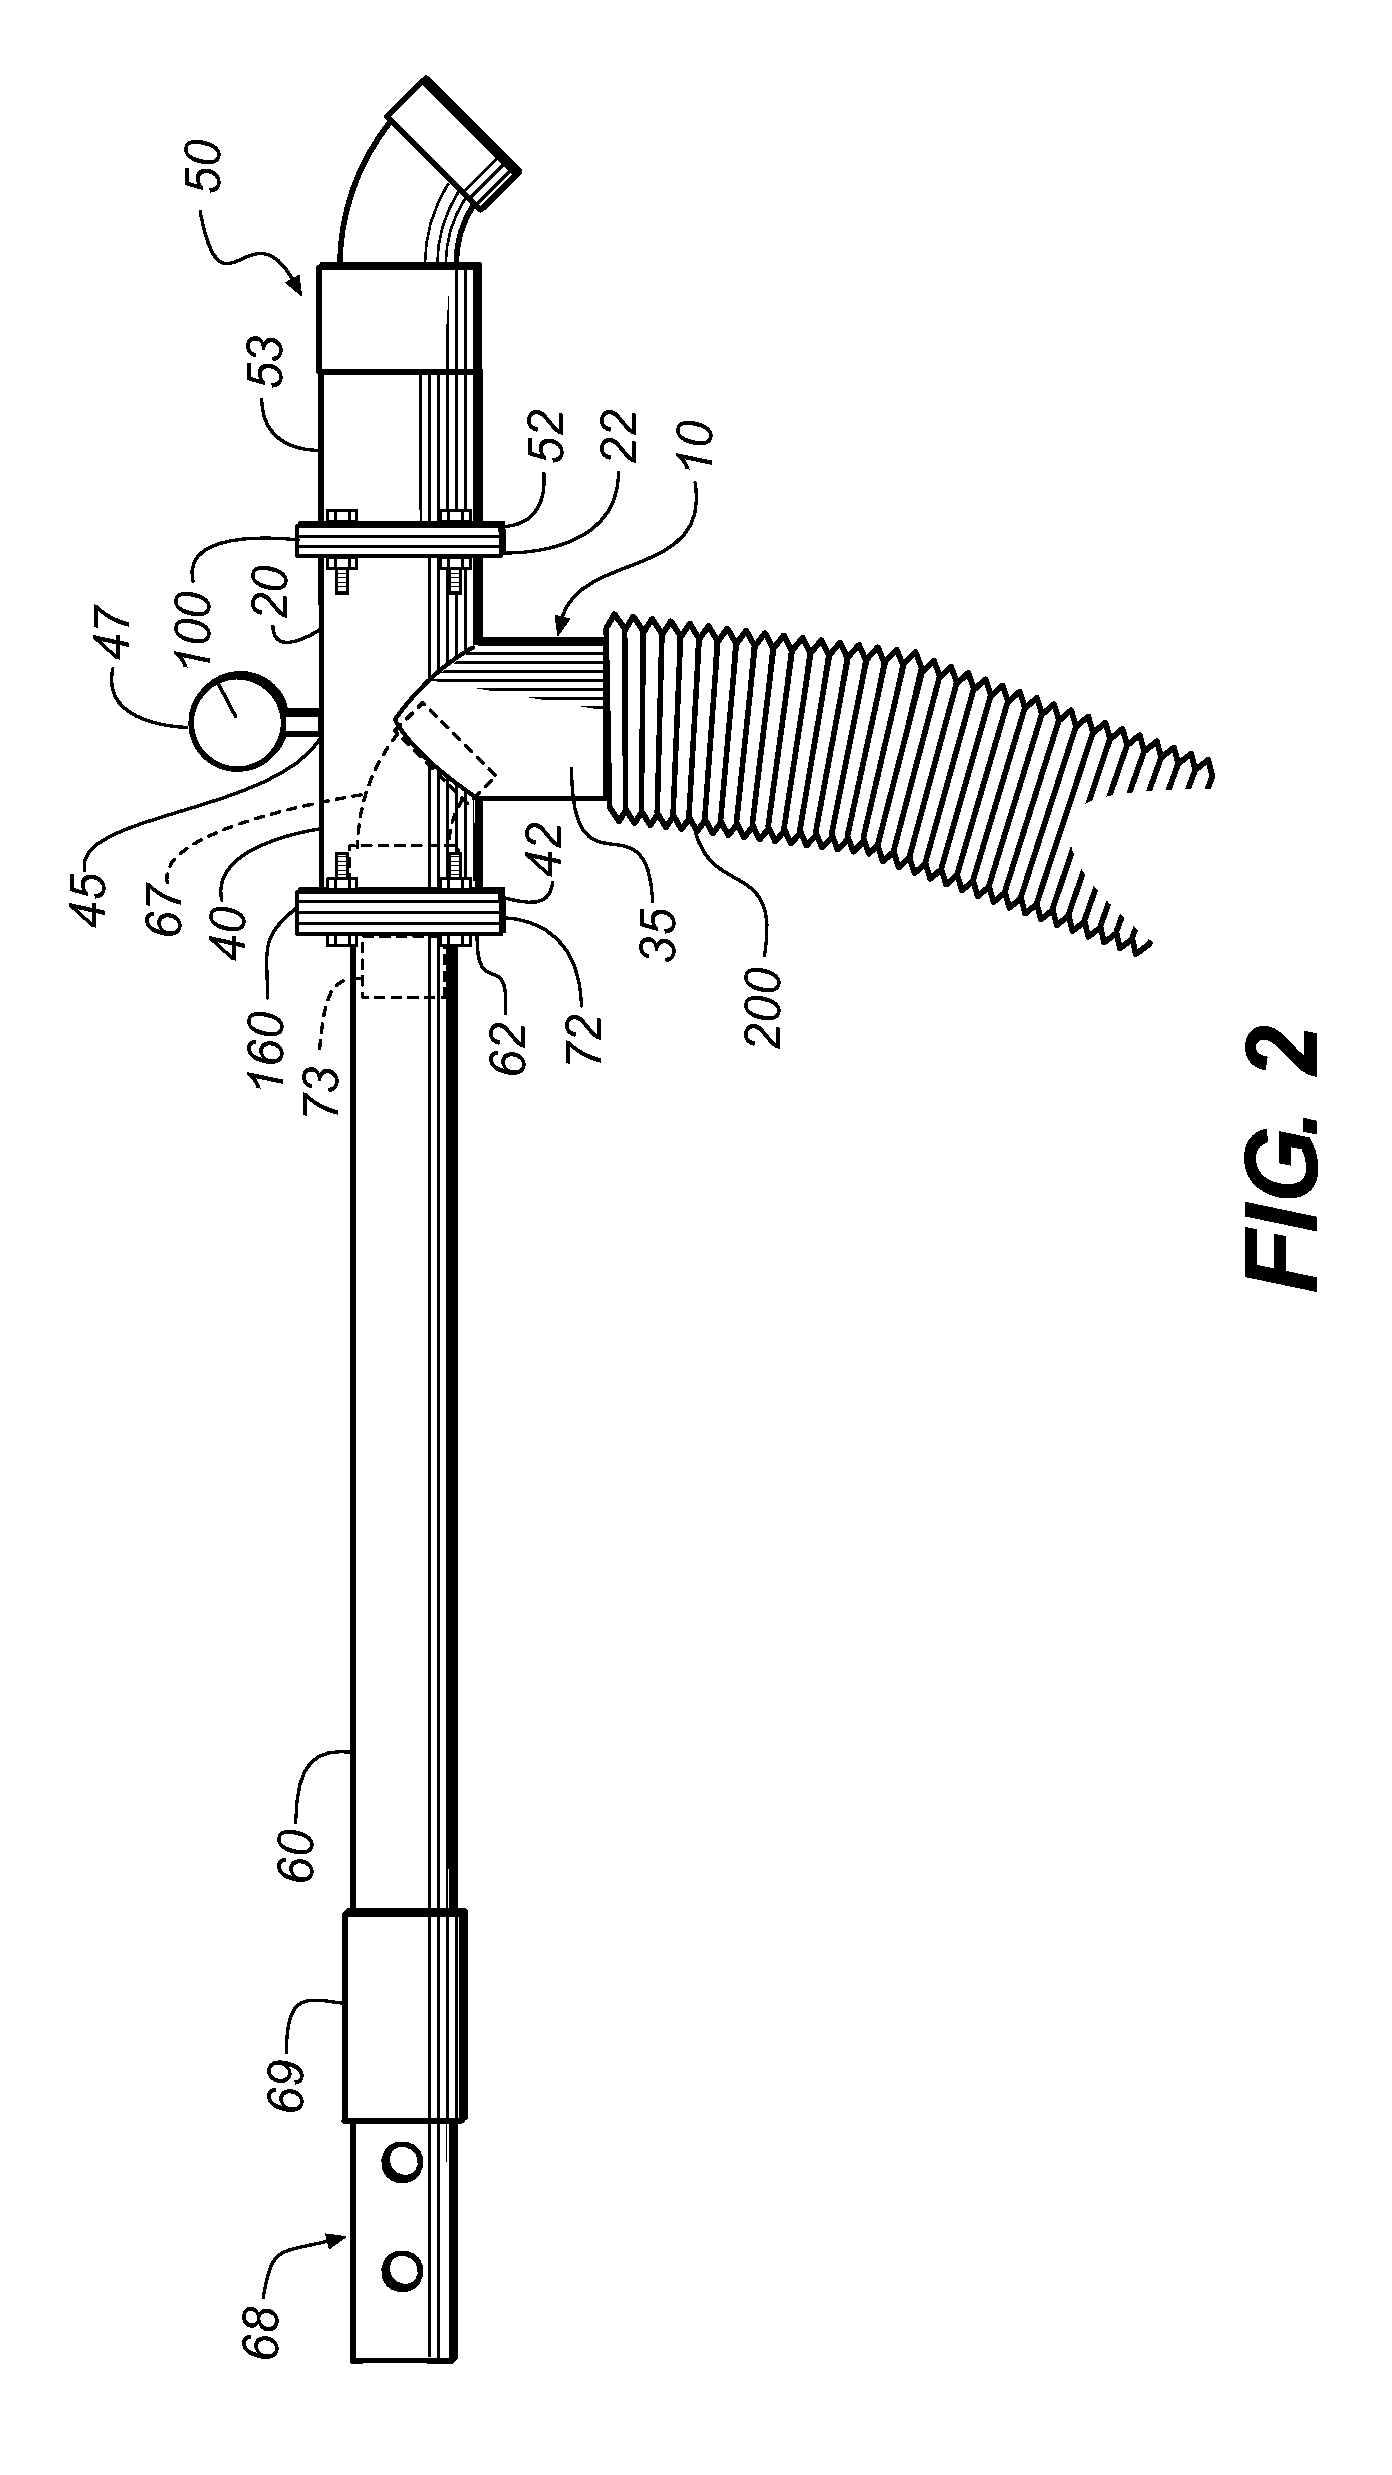 Self-limiting vacuum nozzle and methods for using same